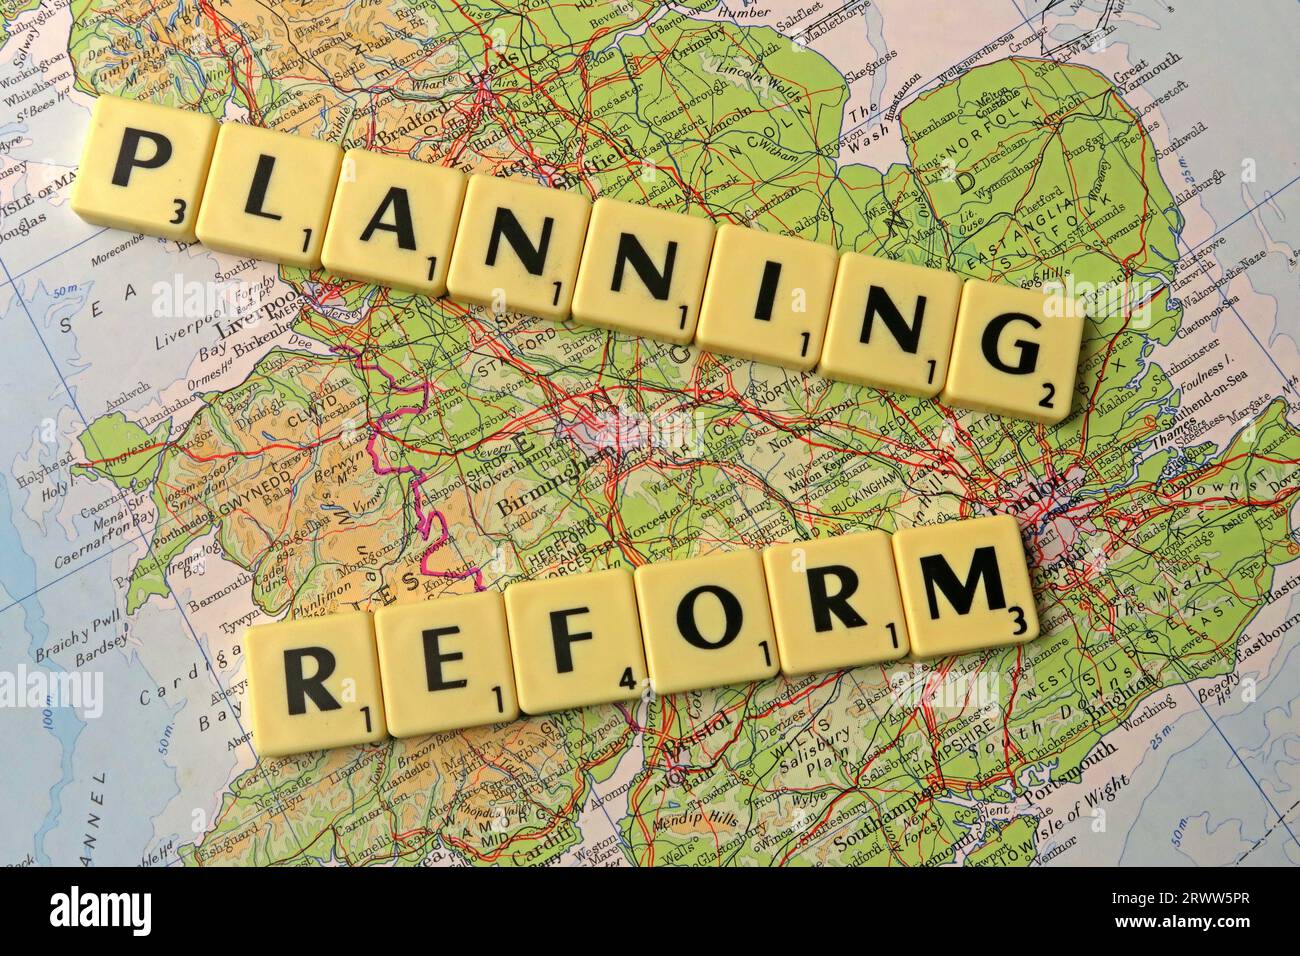 Planning Reform spelled out in Scrabble letters and words on a map of England - local development and building control Stock Photo